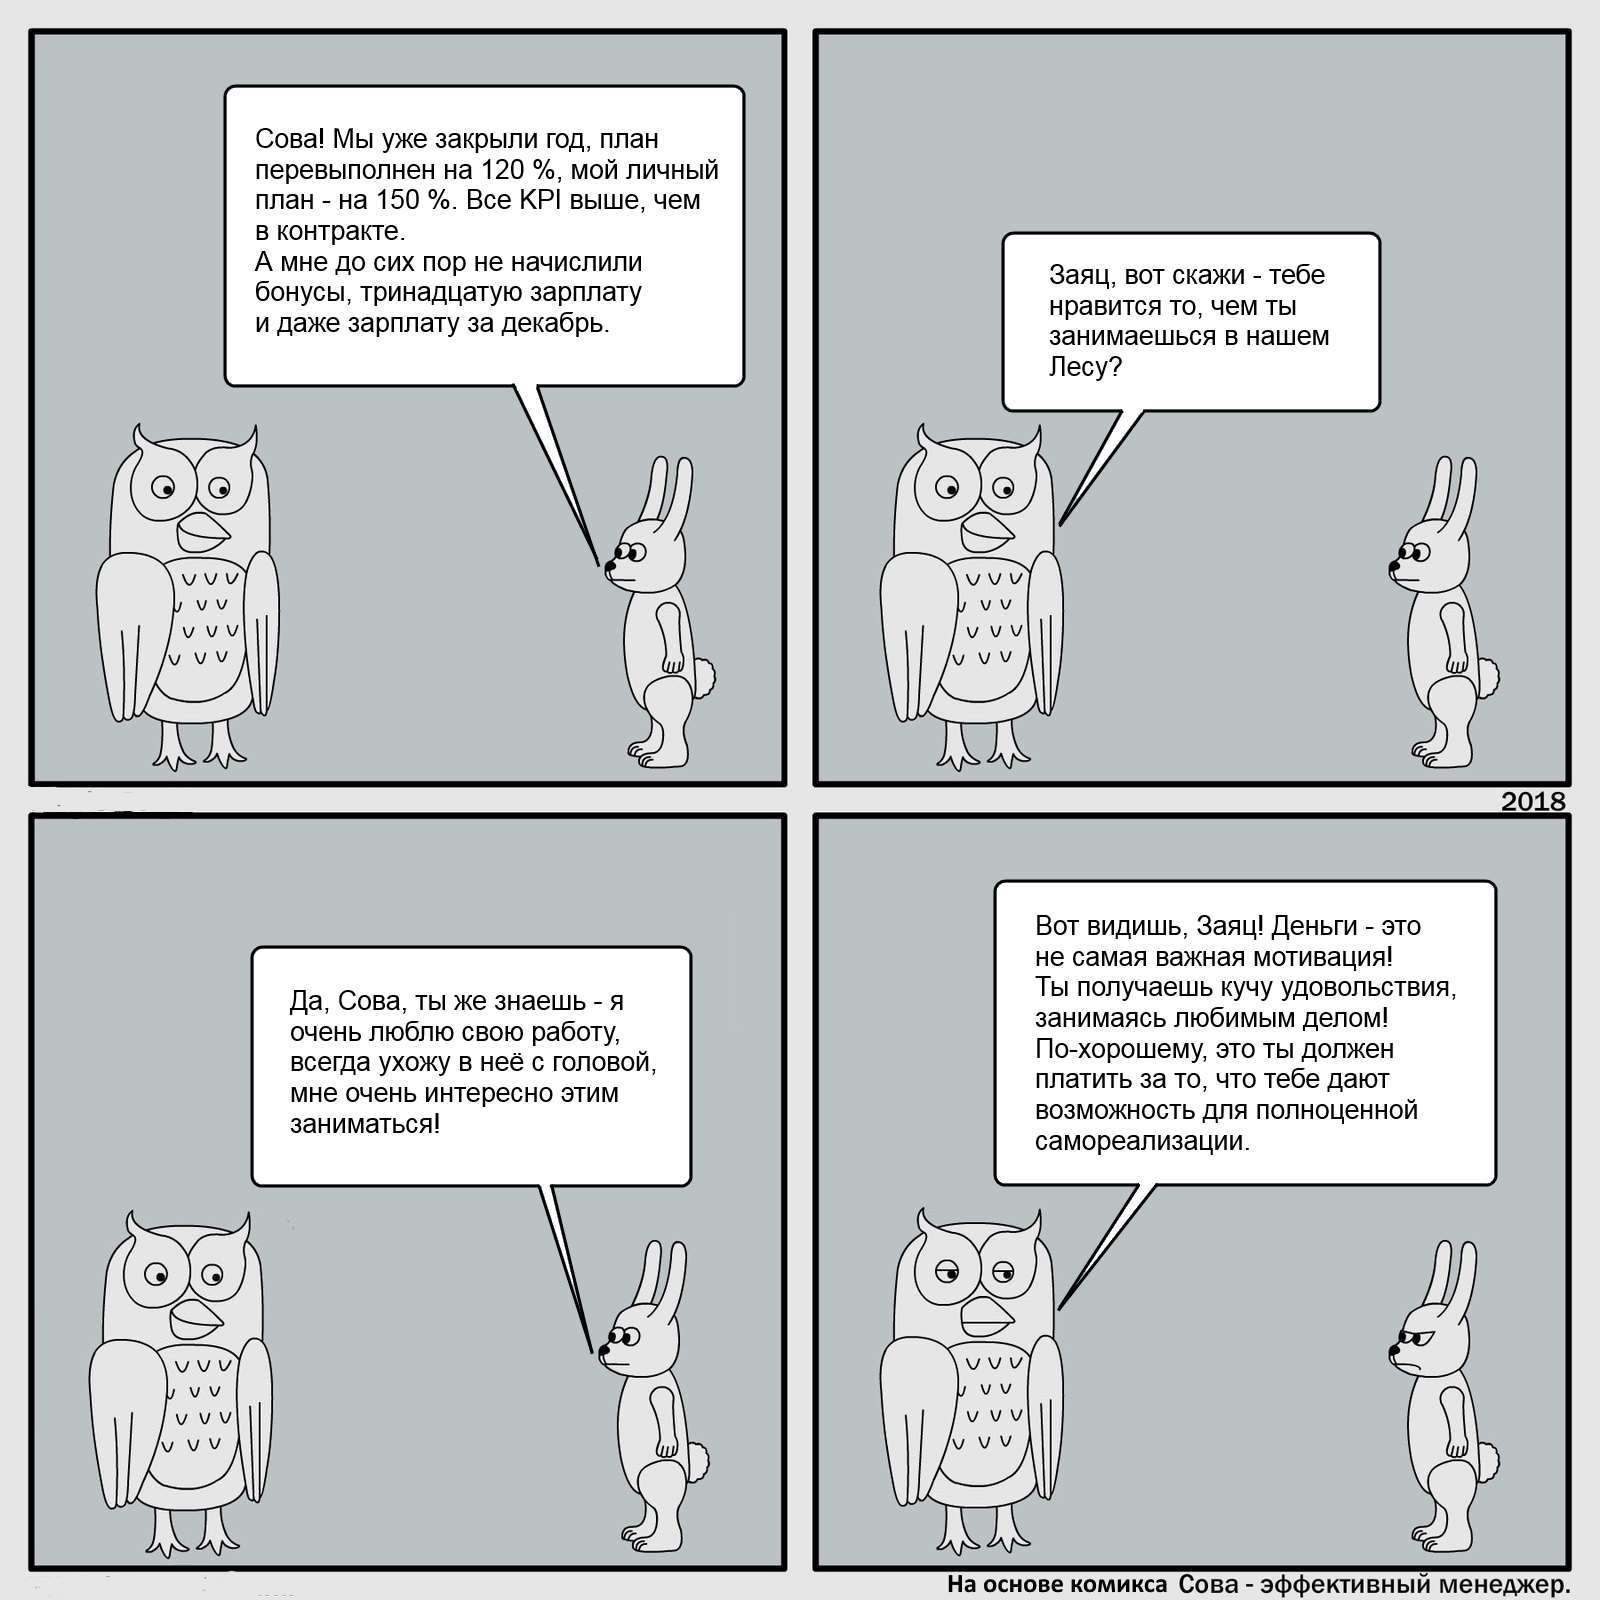 Motivated Hare - My, Fanfiction about the effective owl, Фанфик, Comics, Drawing, Motivation